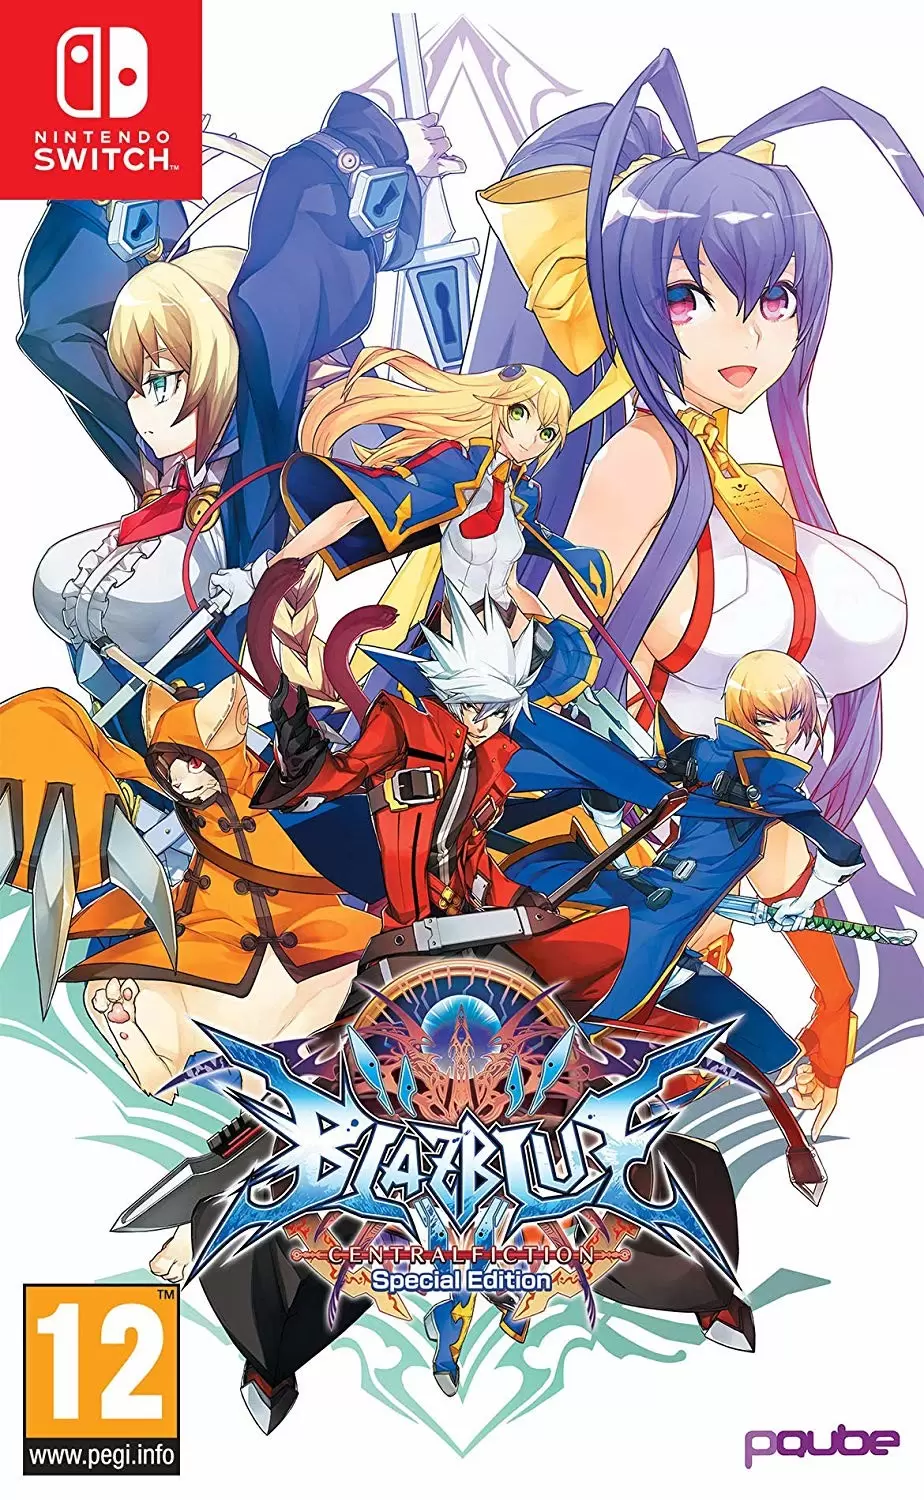 Nintendo Switch Games - Blazblue Central Fiction - Special Edition